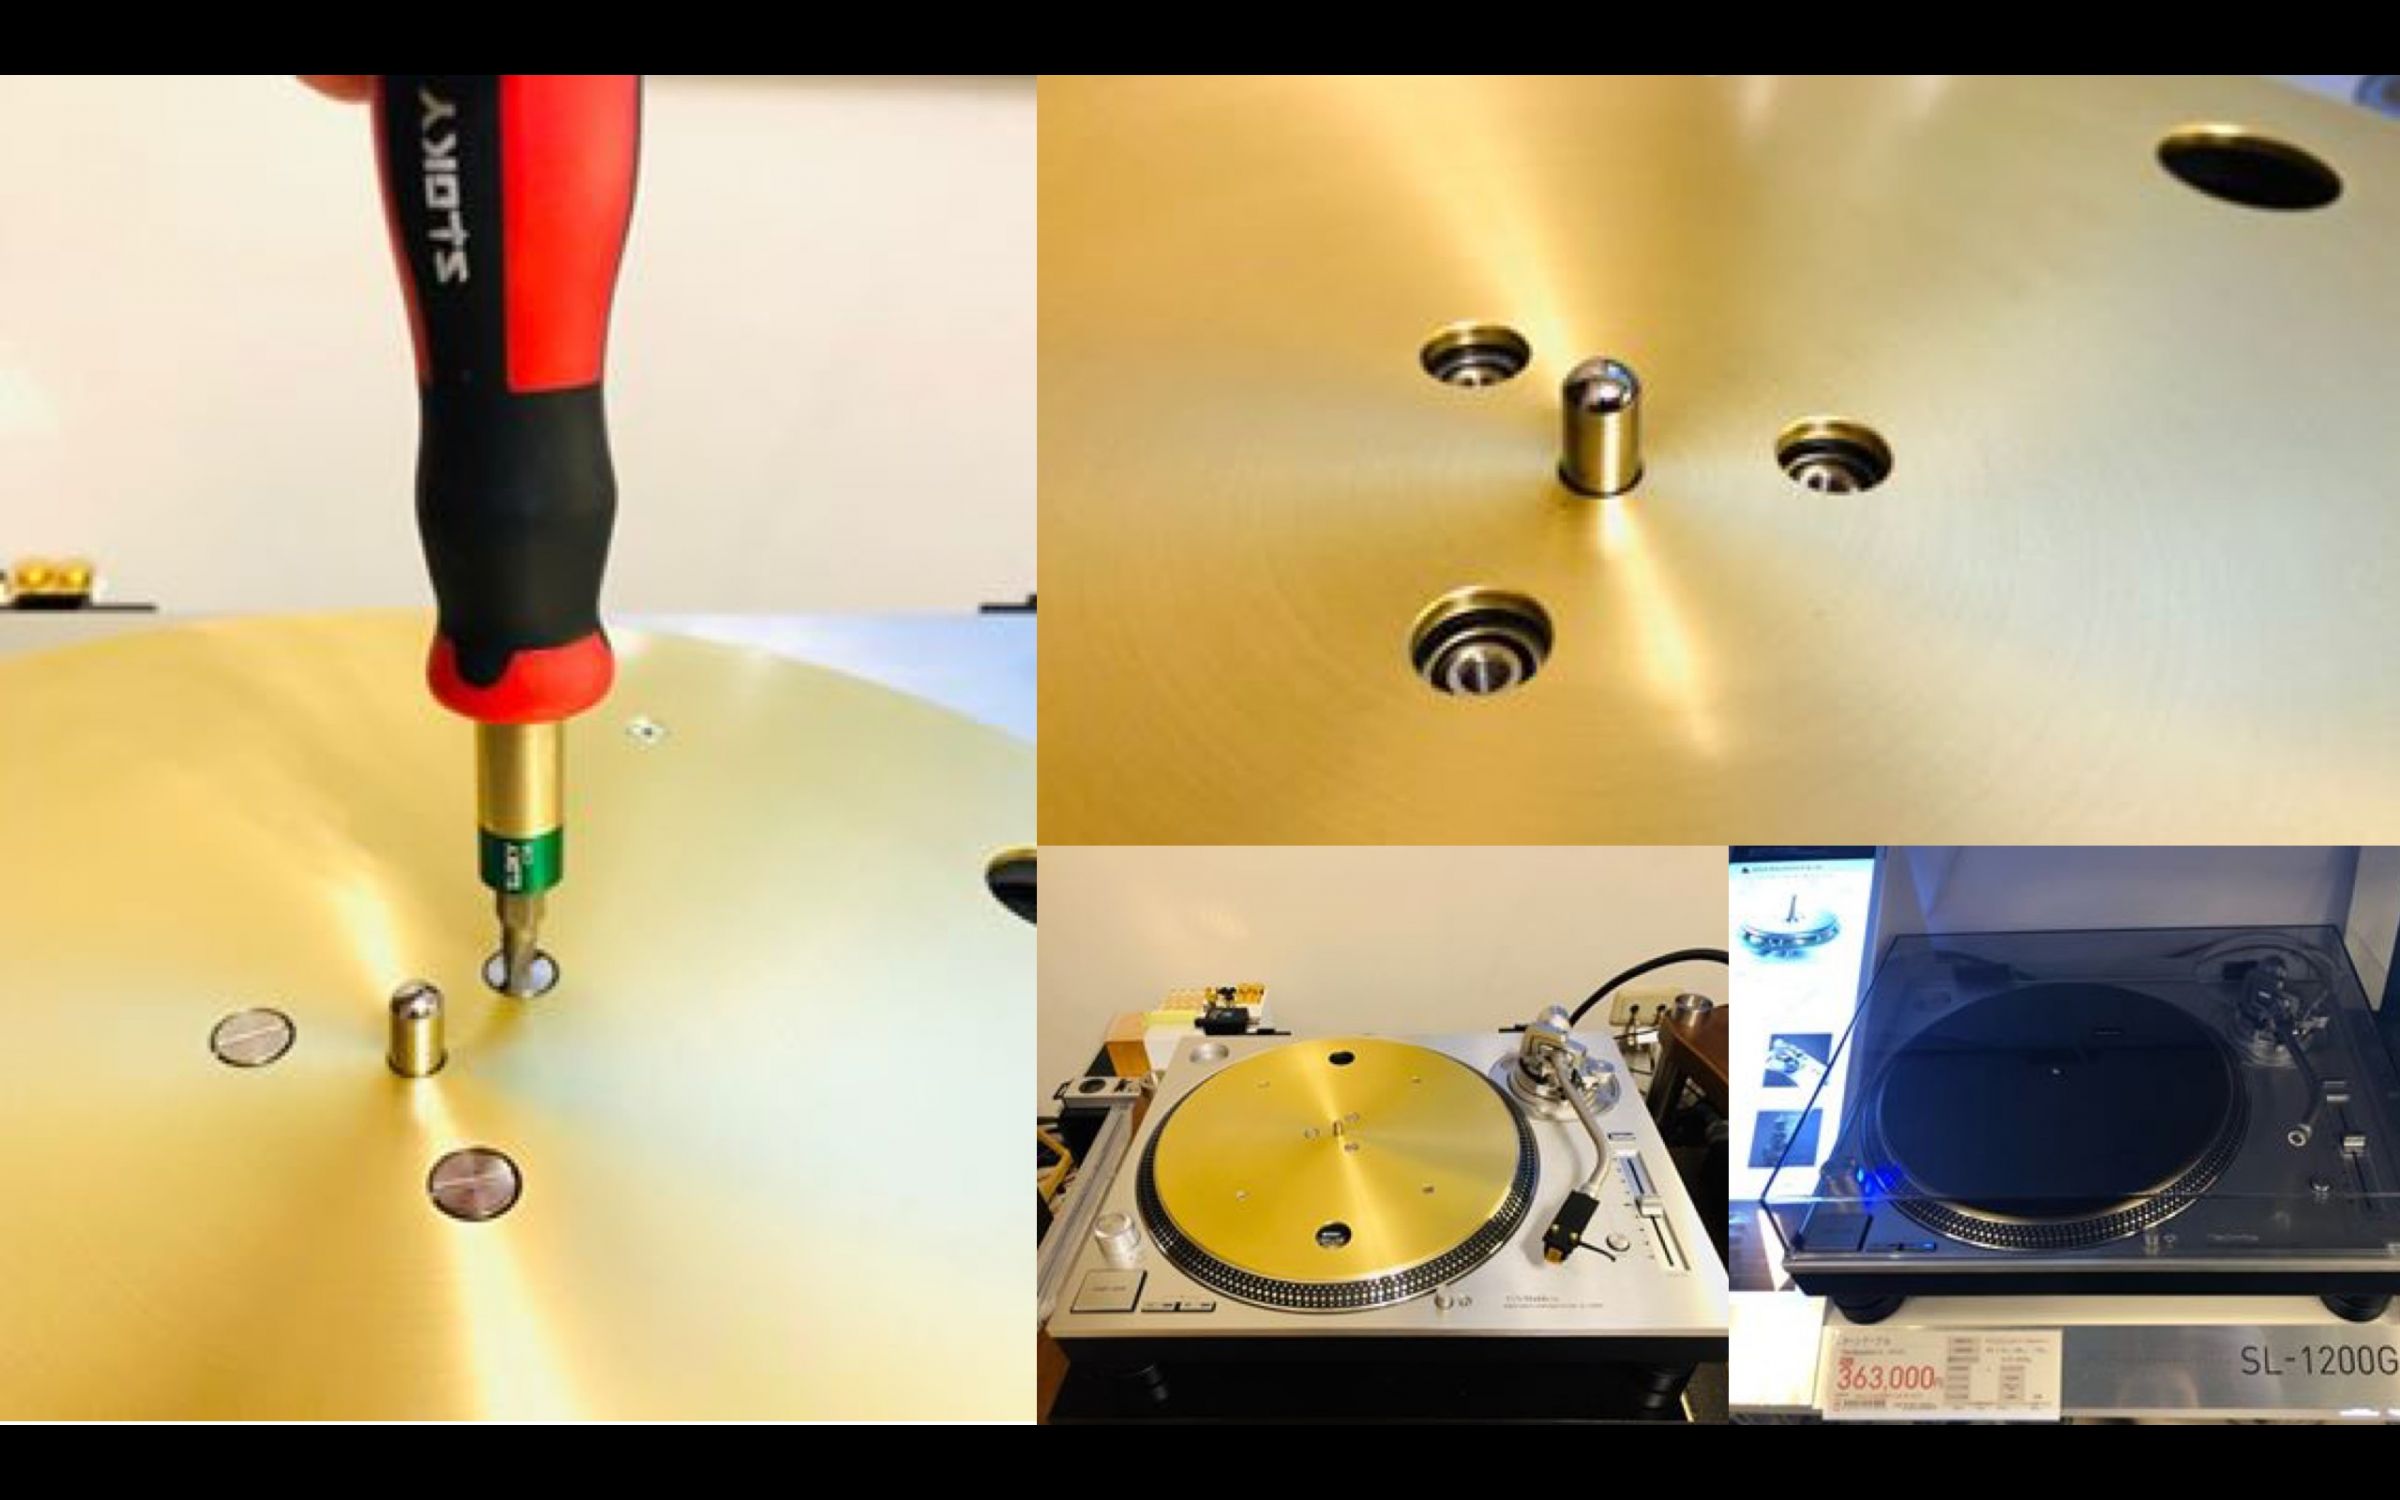 We may customize Sloky torque devices for your turntable application